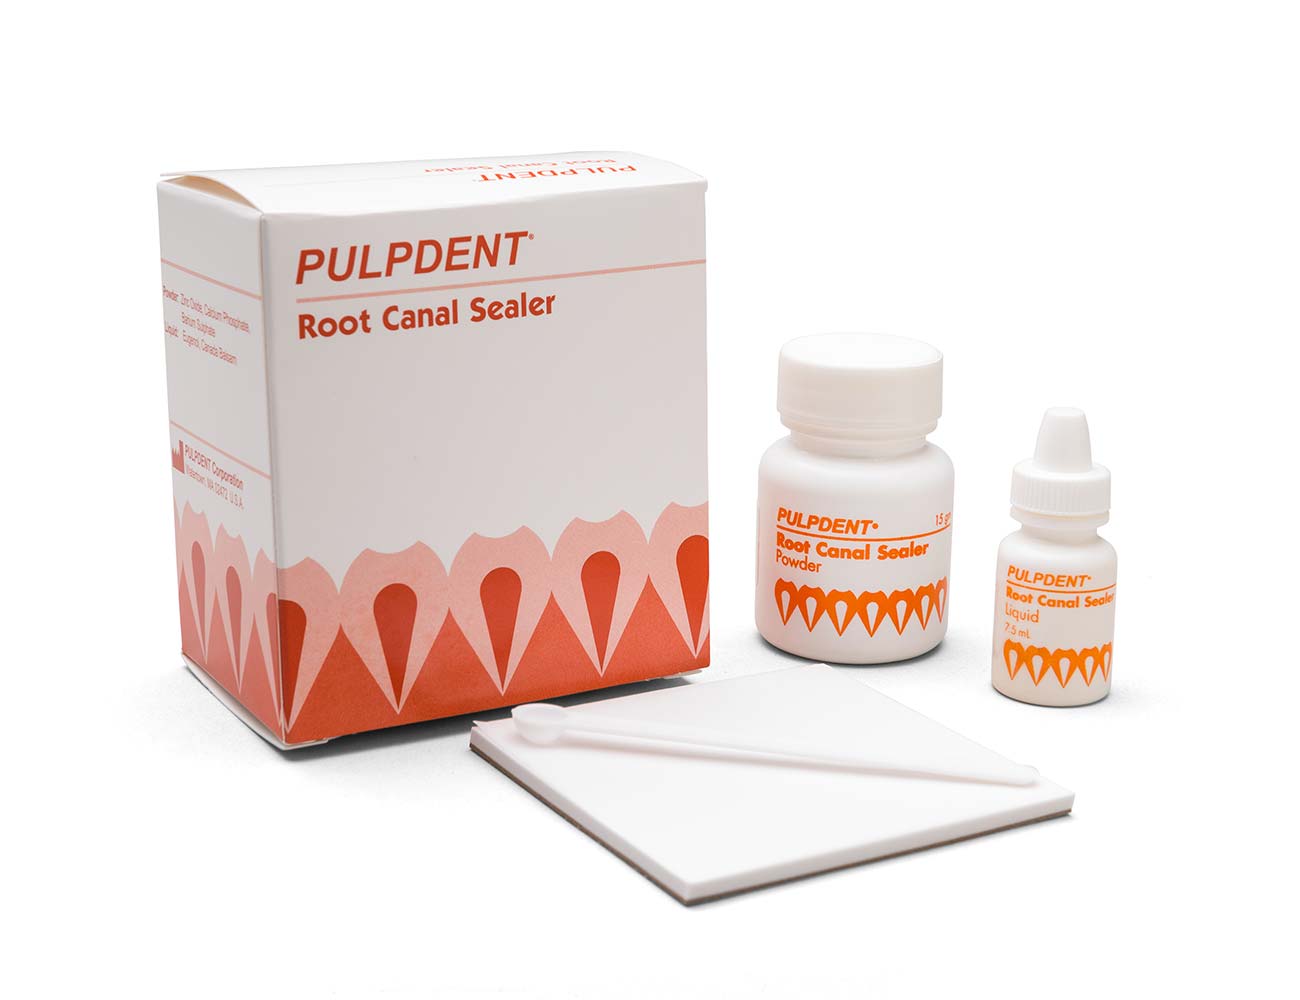 Pulpdent Root Canal Sealer